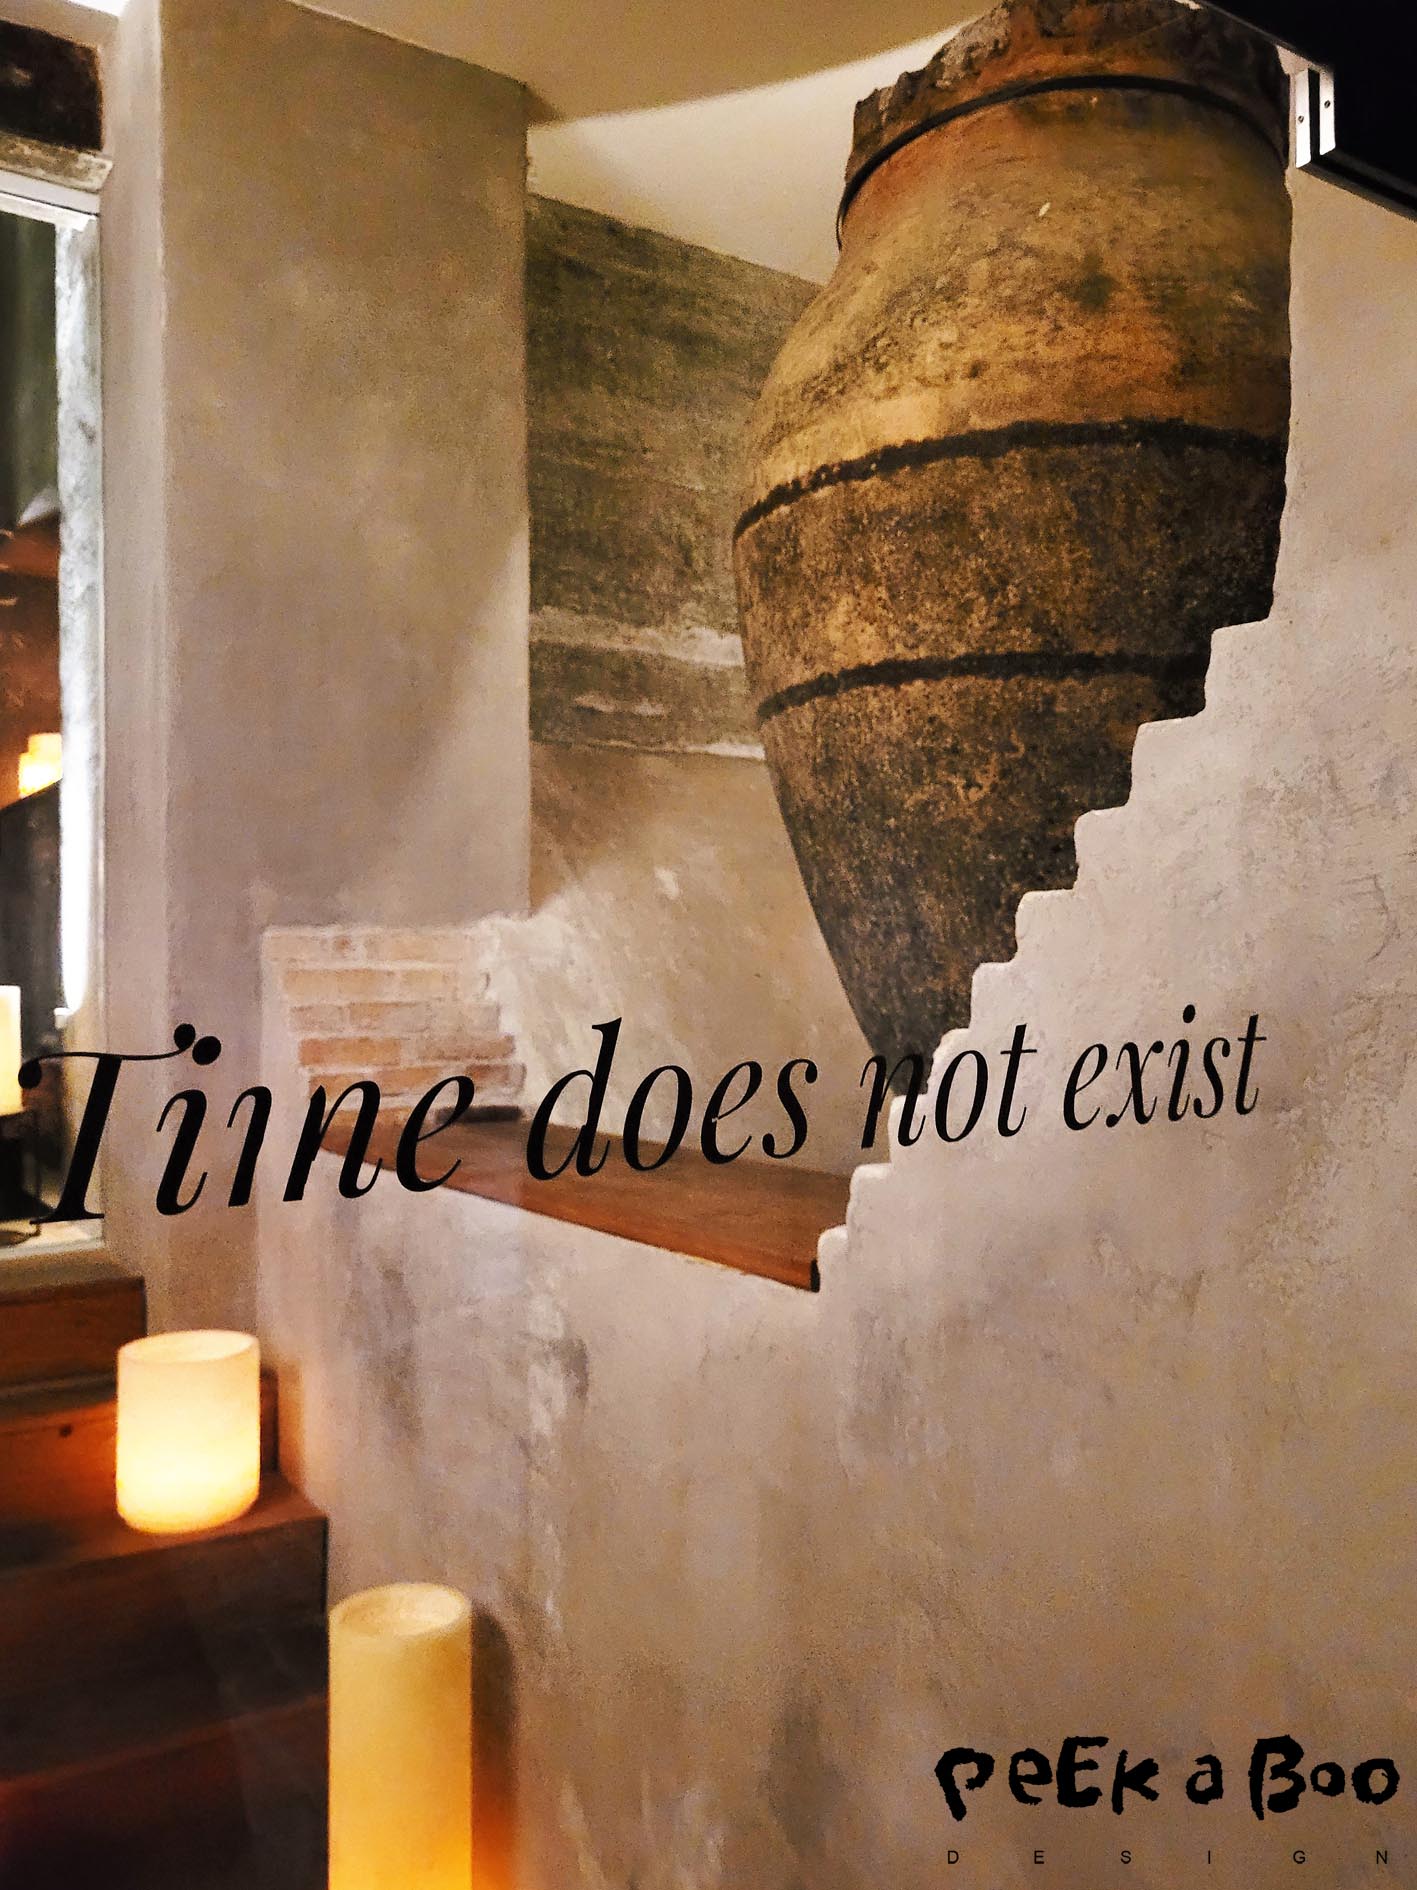 Time does not excist at Aire Ancient Bath, that is so true.